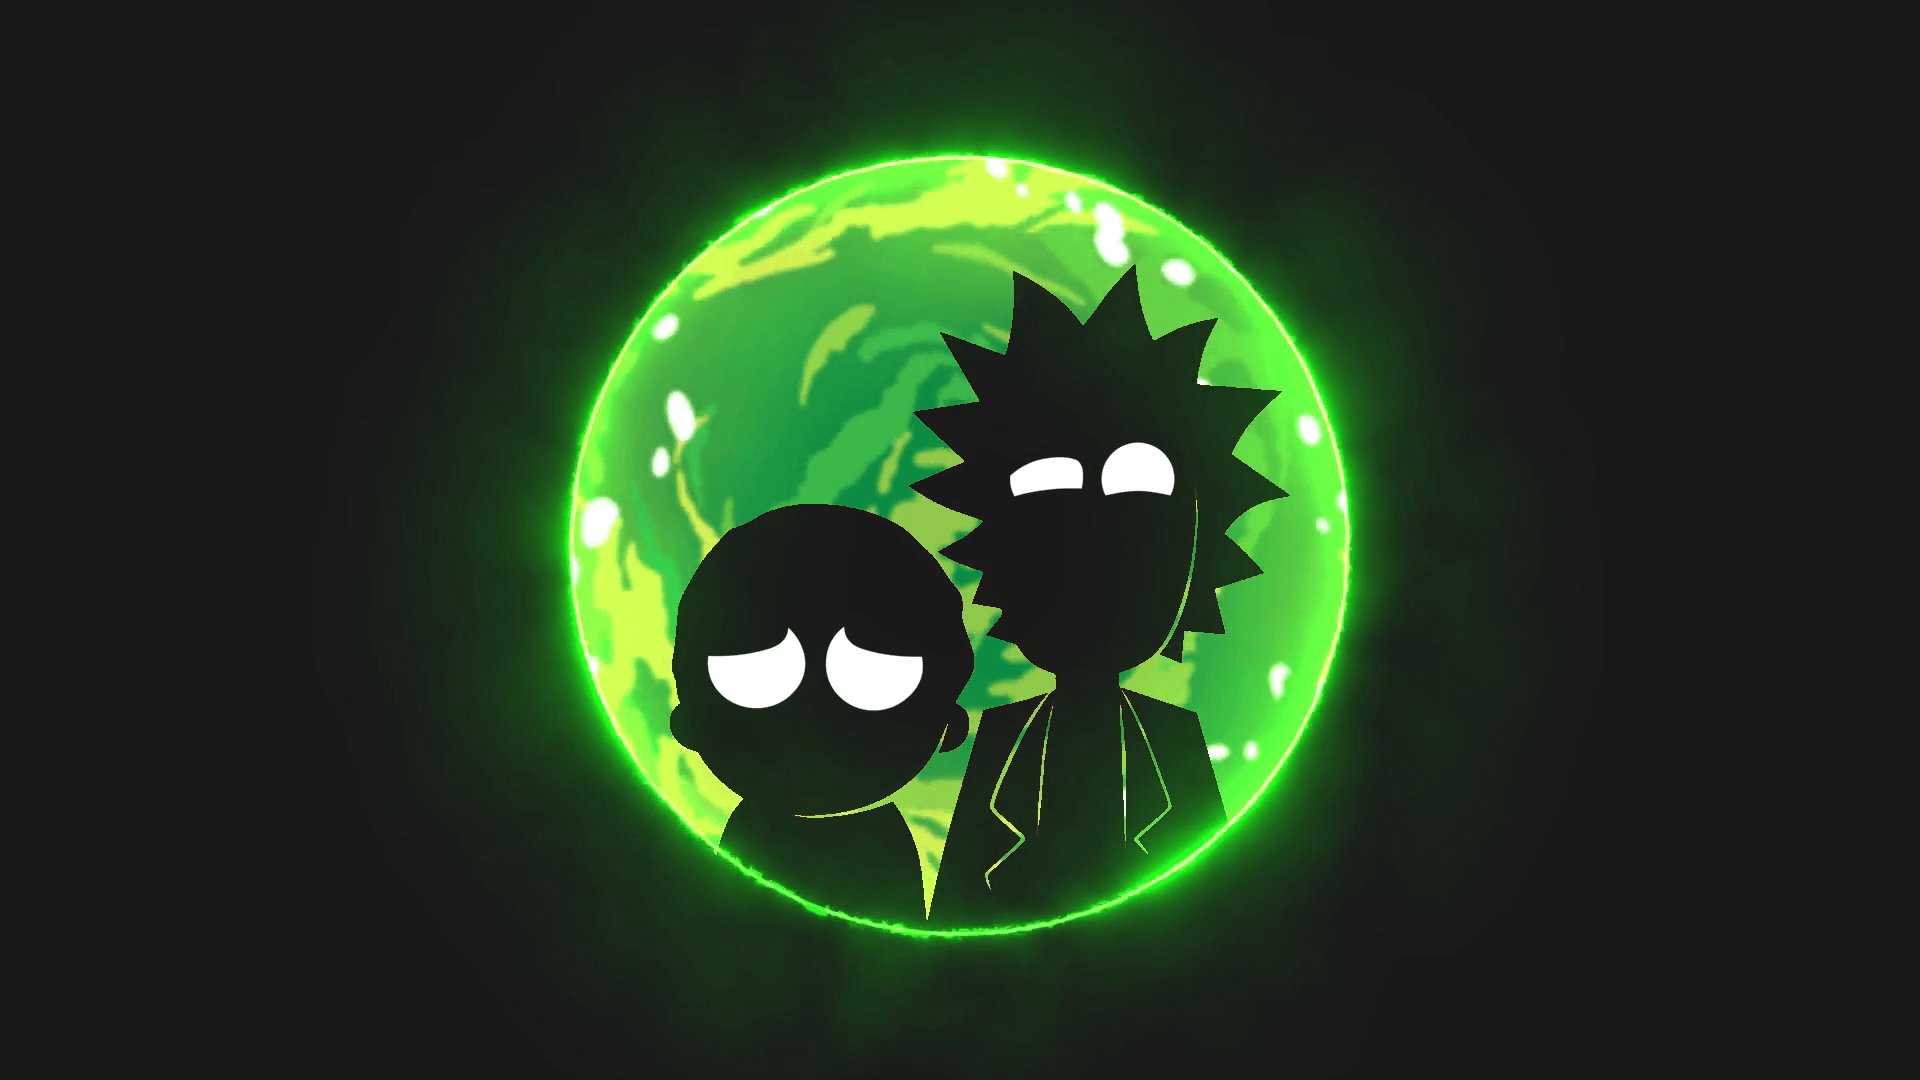 Rick And Morty Hype Wallpapers